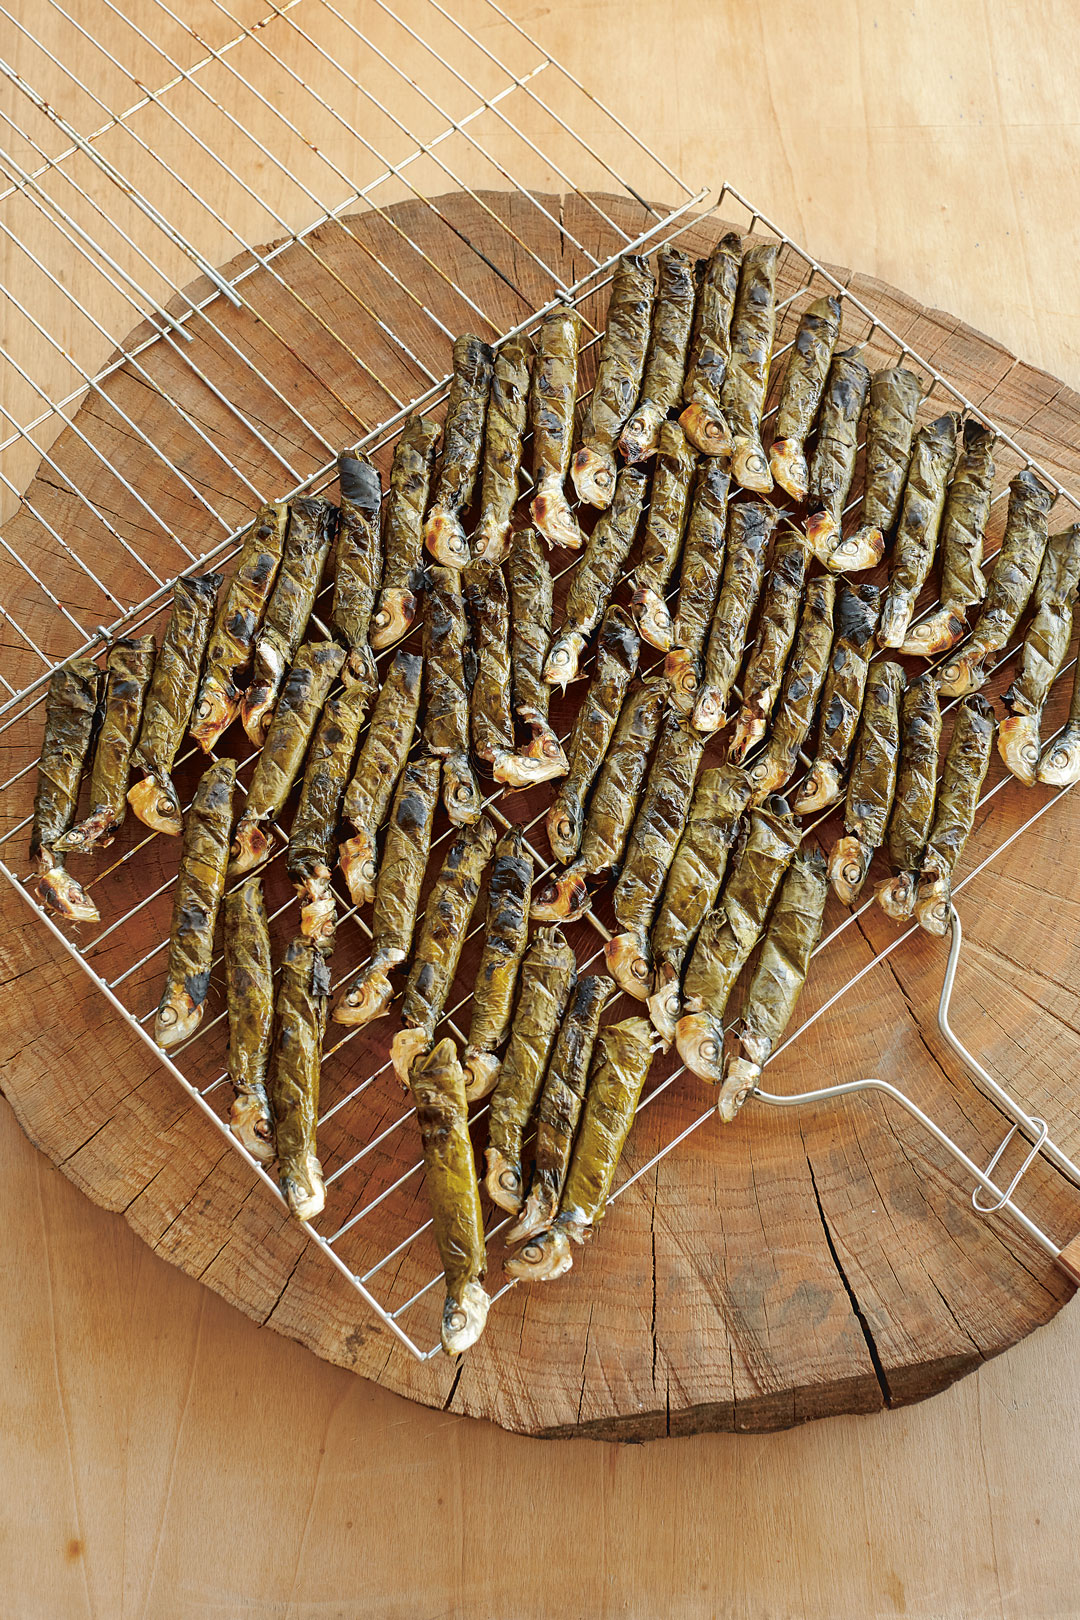 Grilled sardines, from The Turkish Cookbook